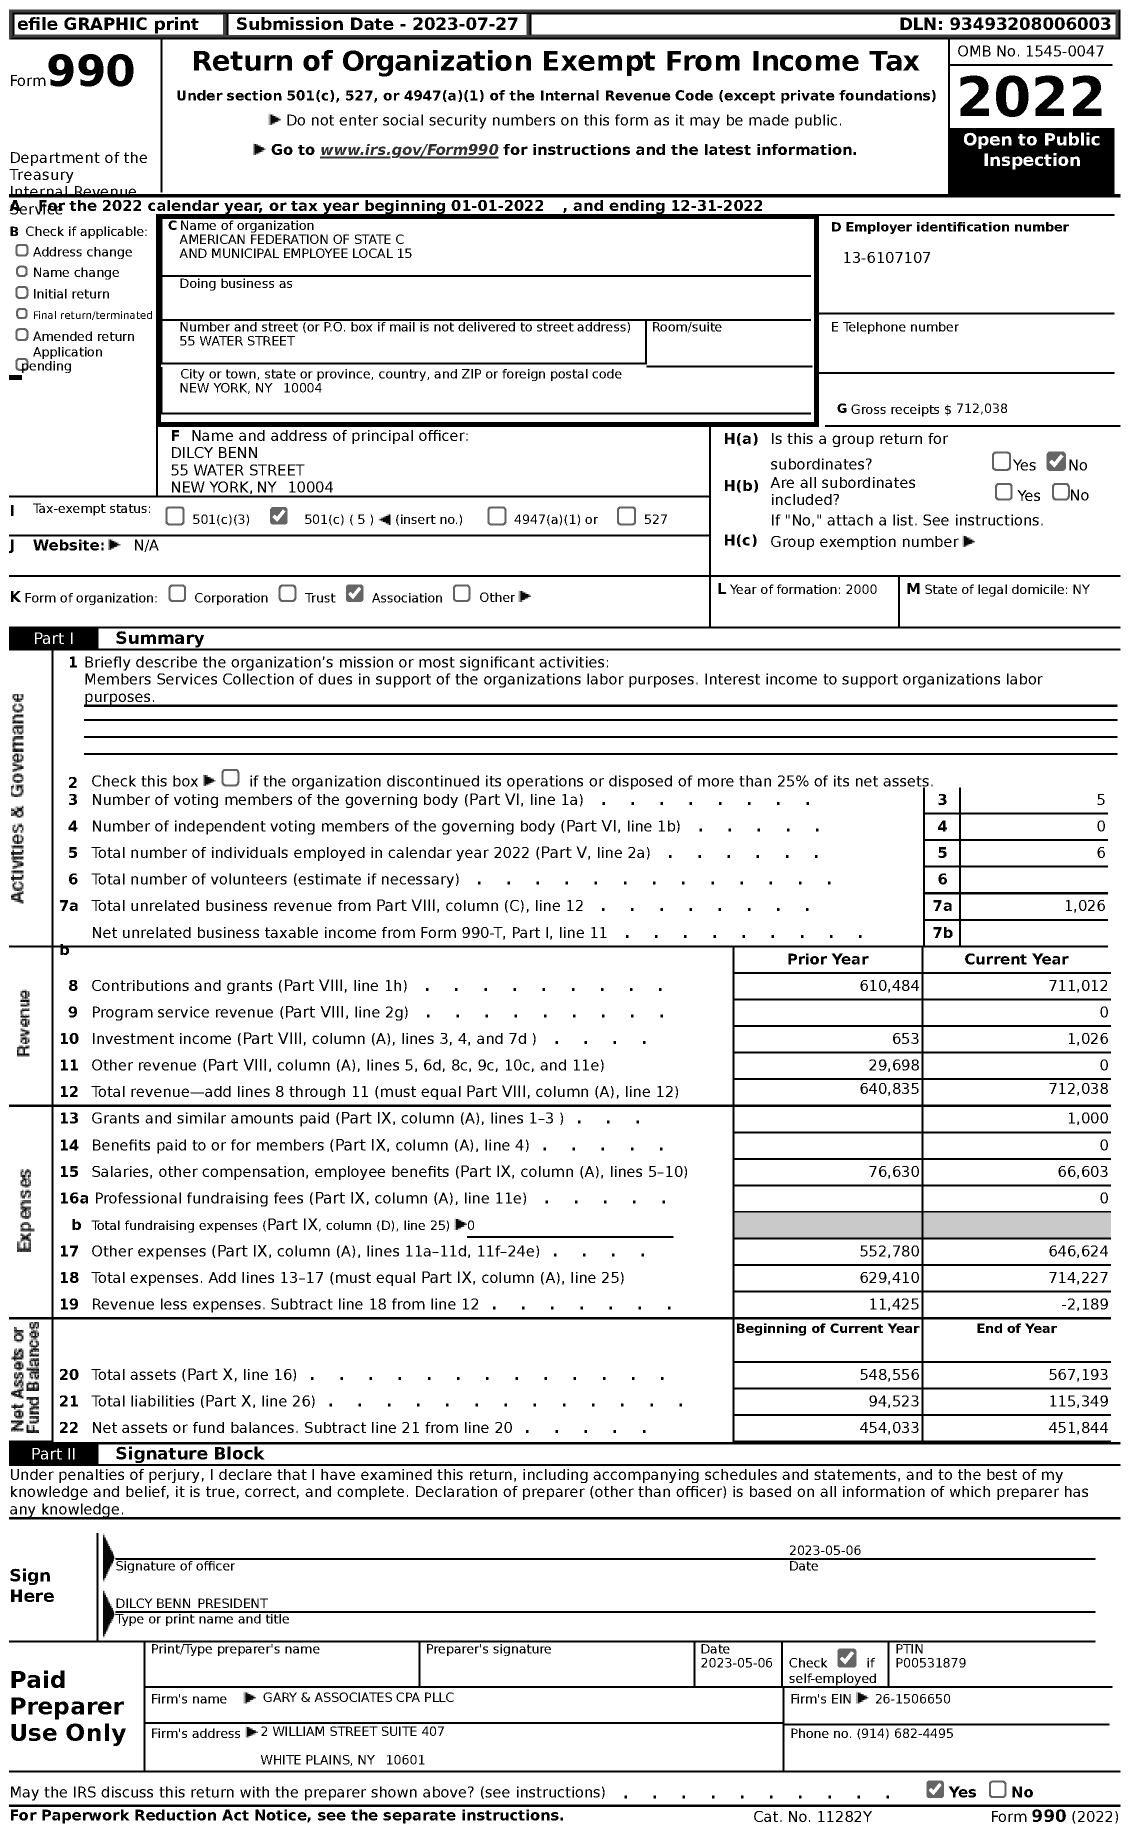 Image of first page of 2022 Form 990 for American Federation of State County & Municipal Employees - L1505ny Ny Att Debris PK SVS WKRS